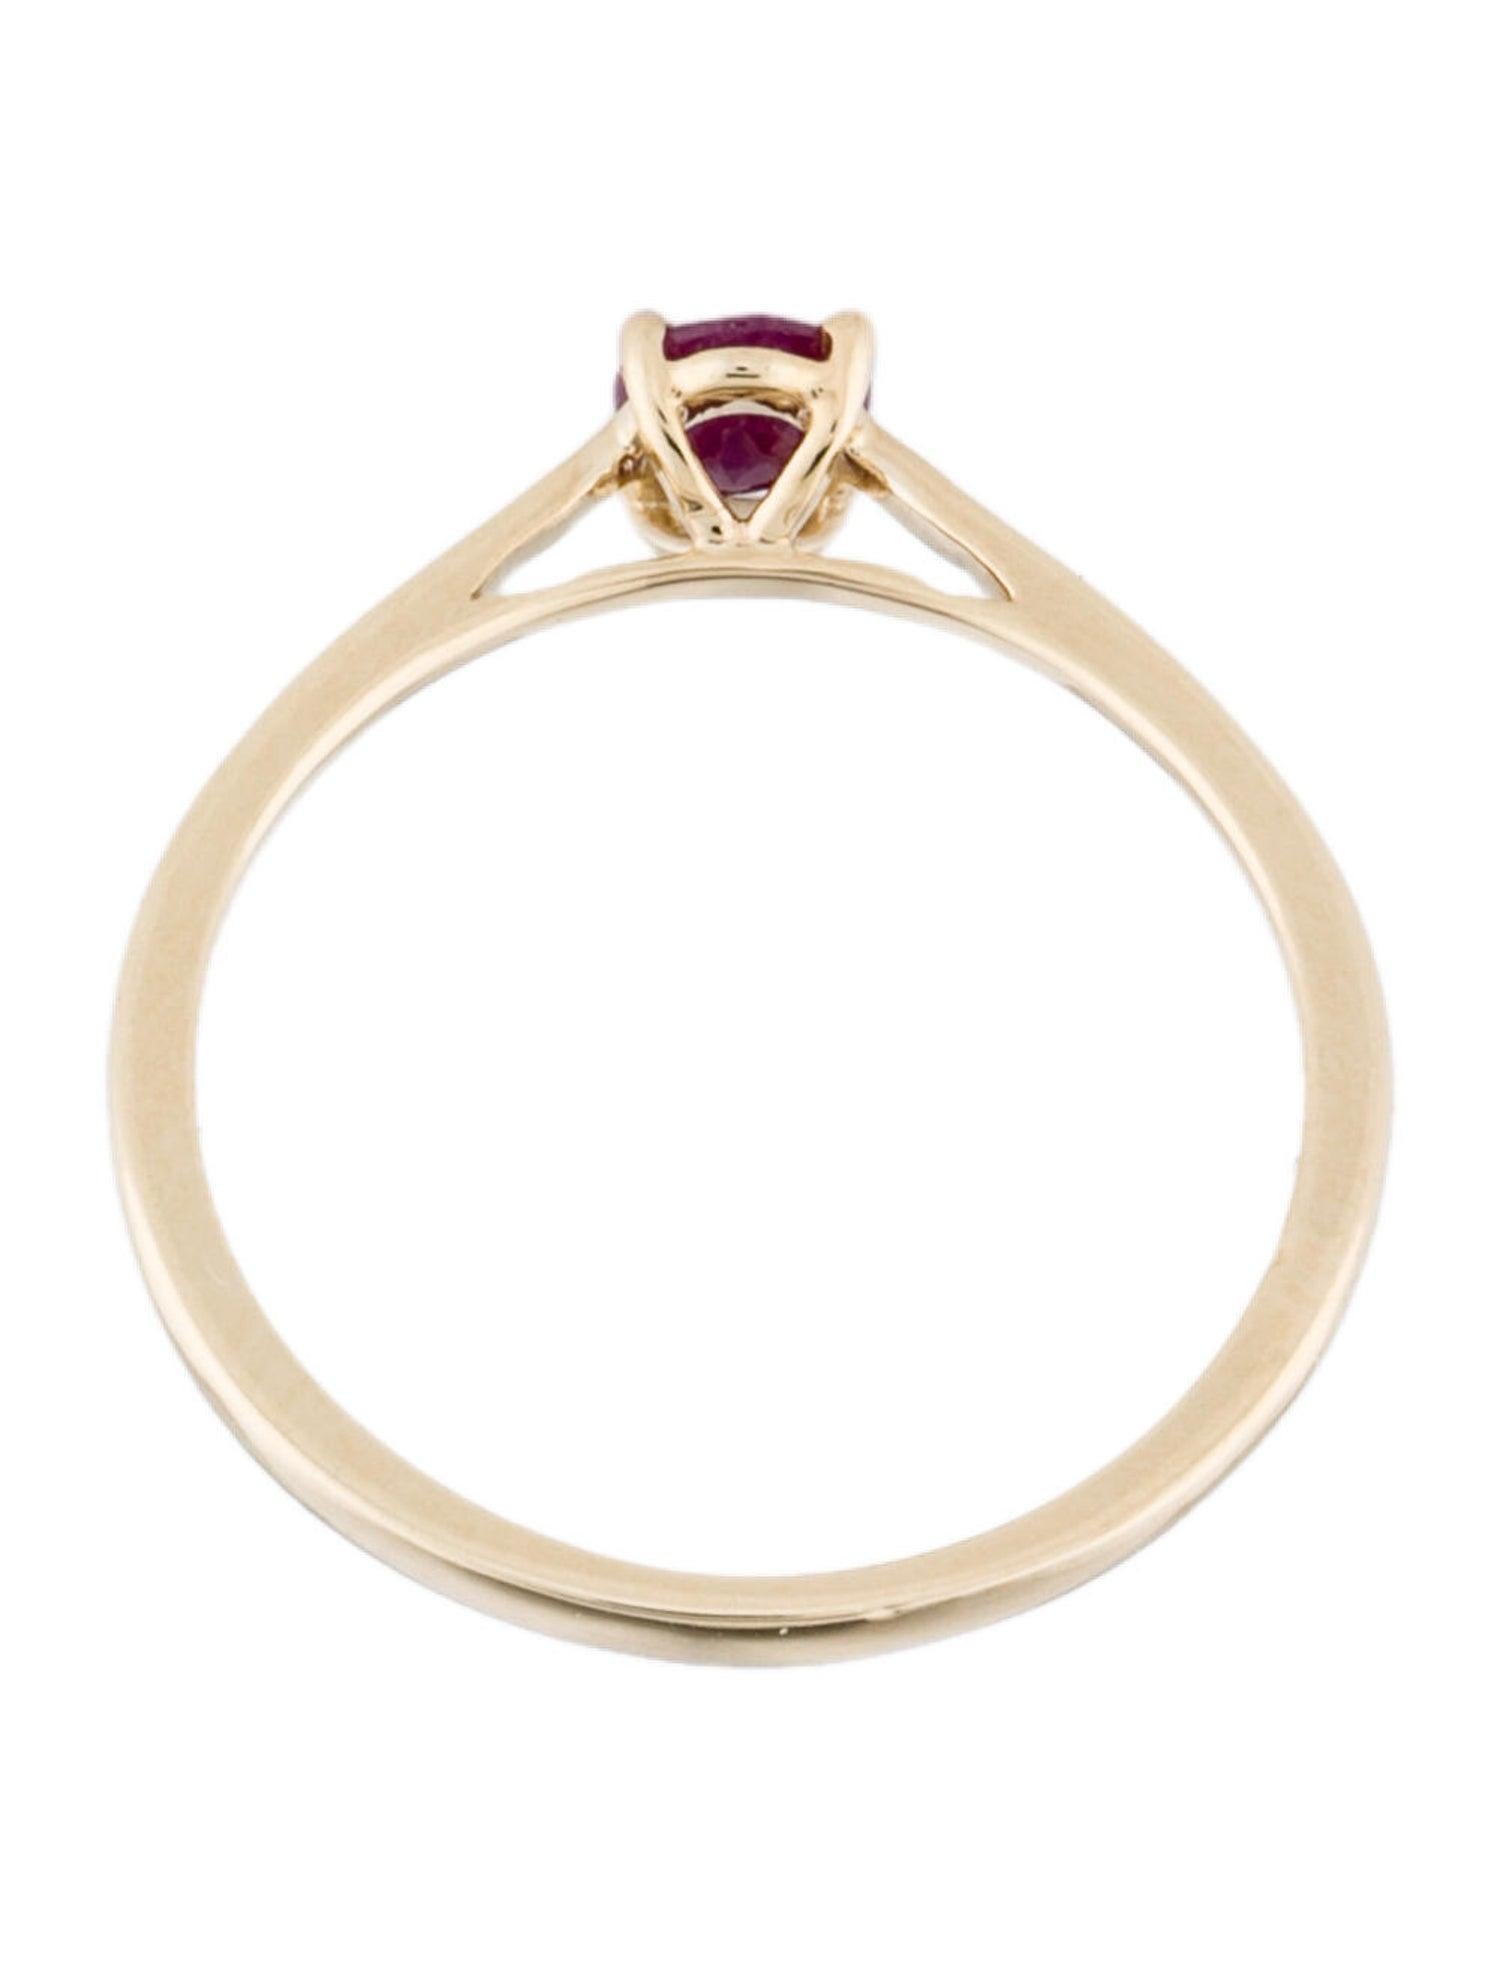 Opulent 14K Ruby Cocktail Ring, Size 7 - Statement Jewelry, Timeless Elegance In New Condition For Sale In Holtsville, NY